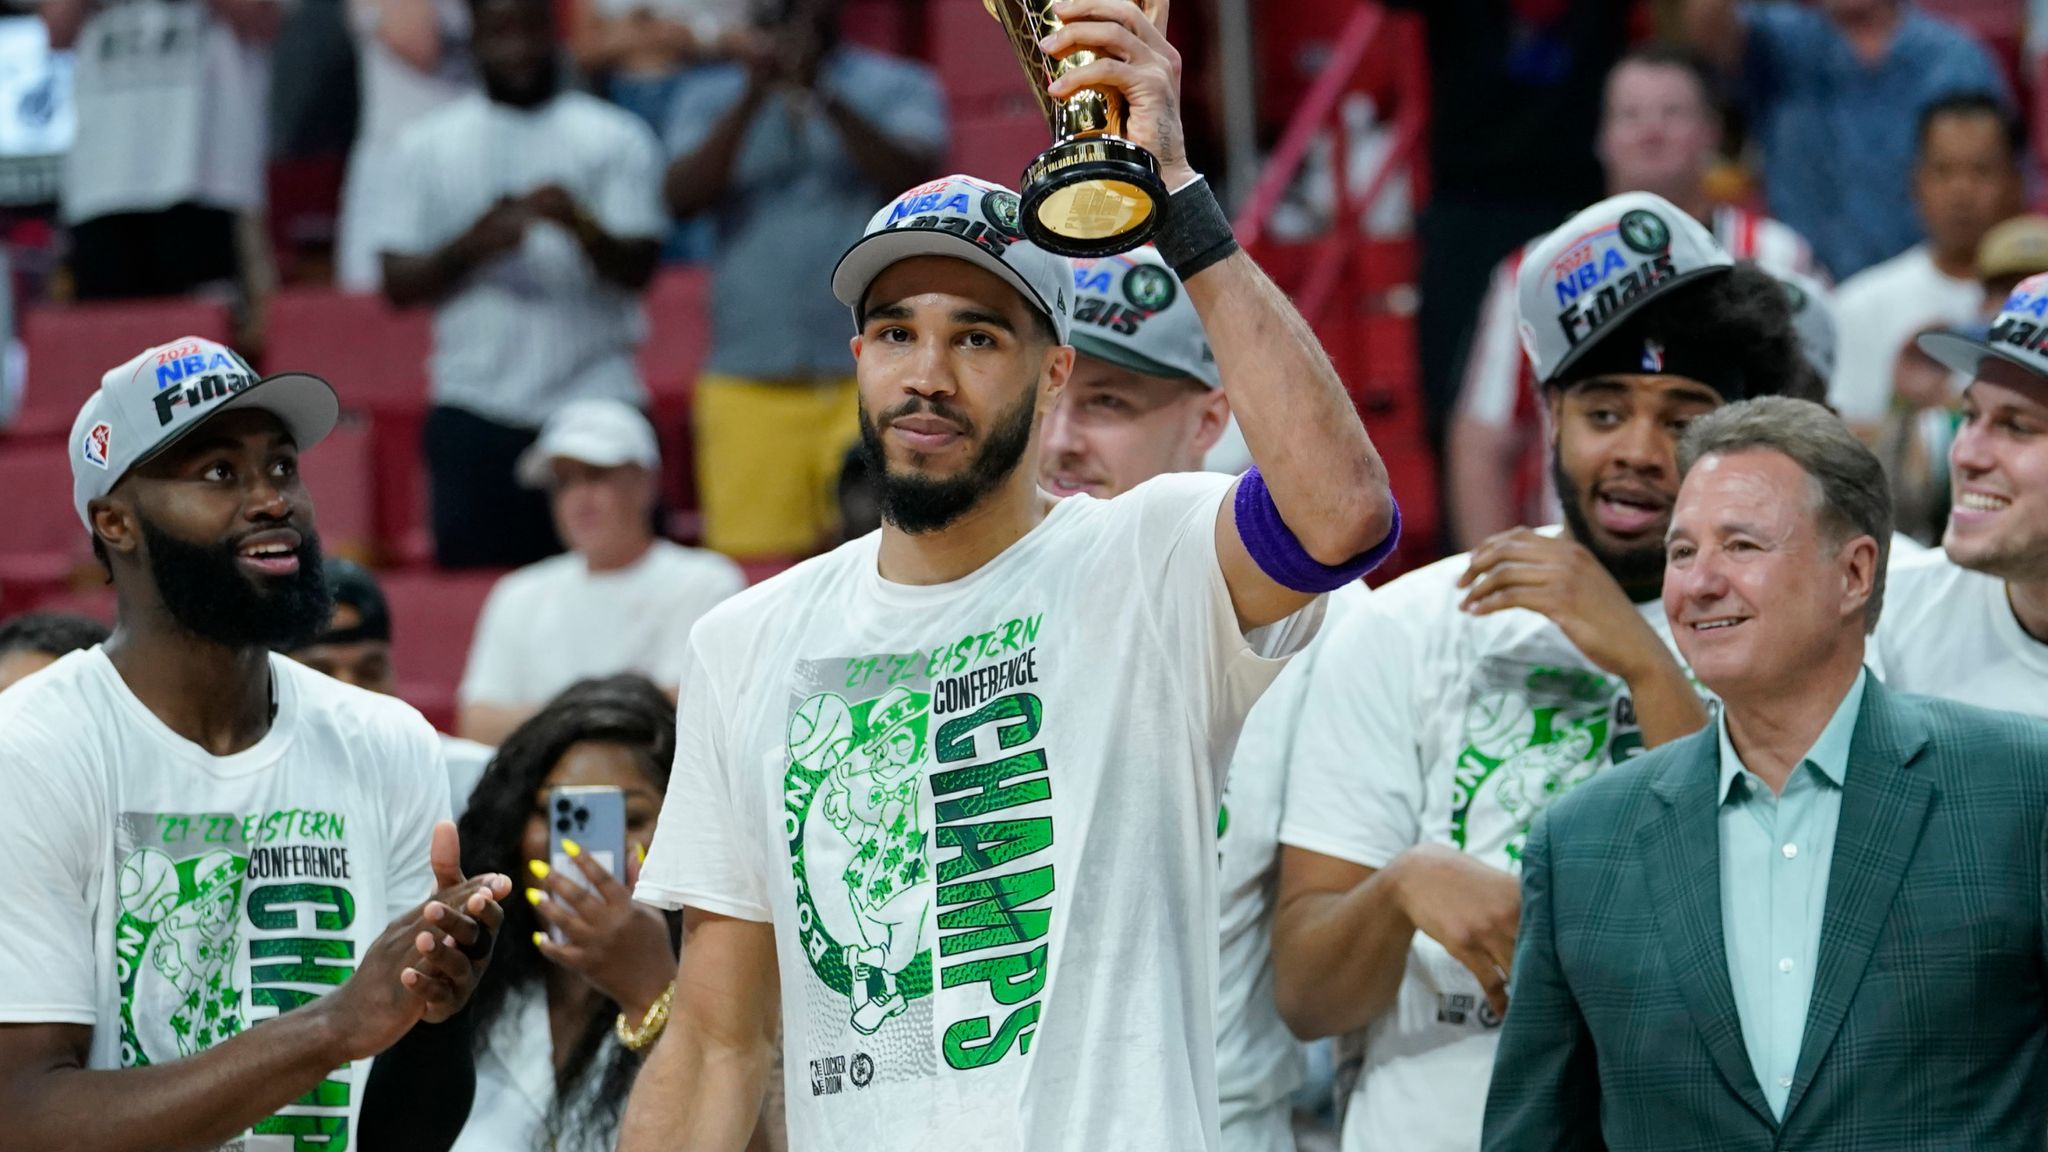 Jayson Tatum reflects on winning the Kobe Bryant Trophy for the NBA All-Star  MVP!!! - - 👉Follow @celtscountry for more content!